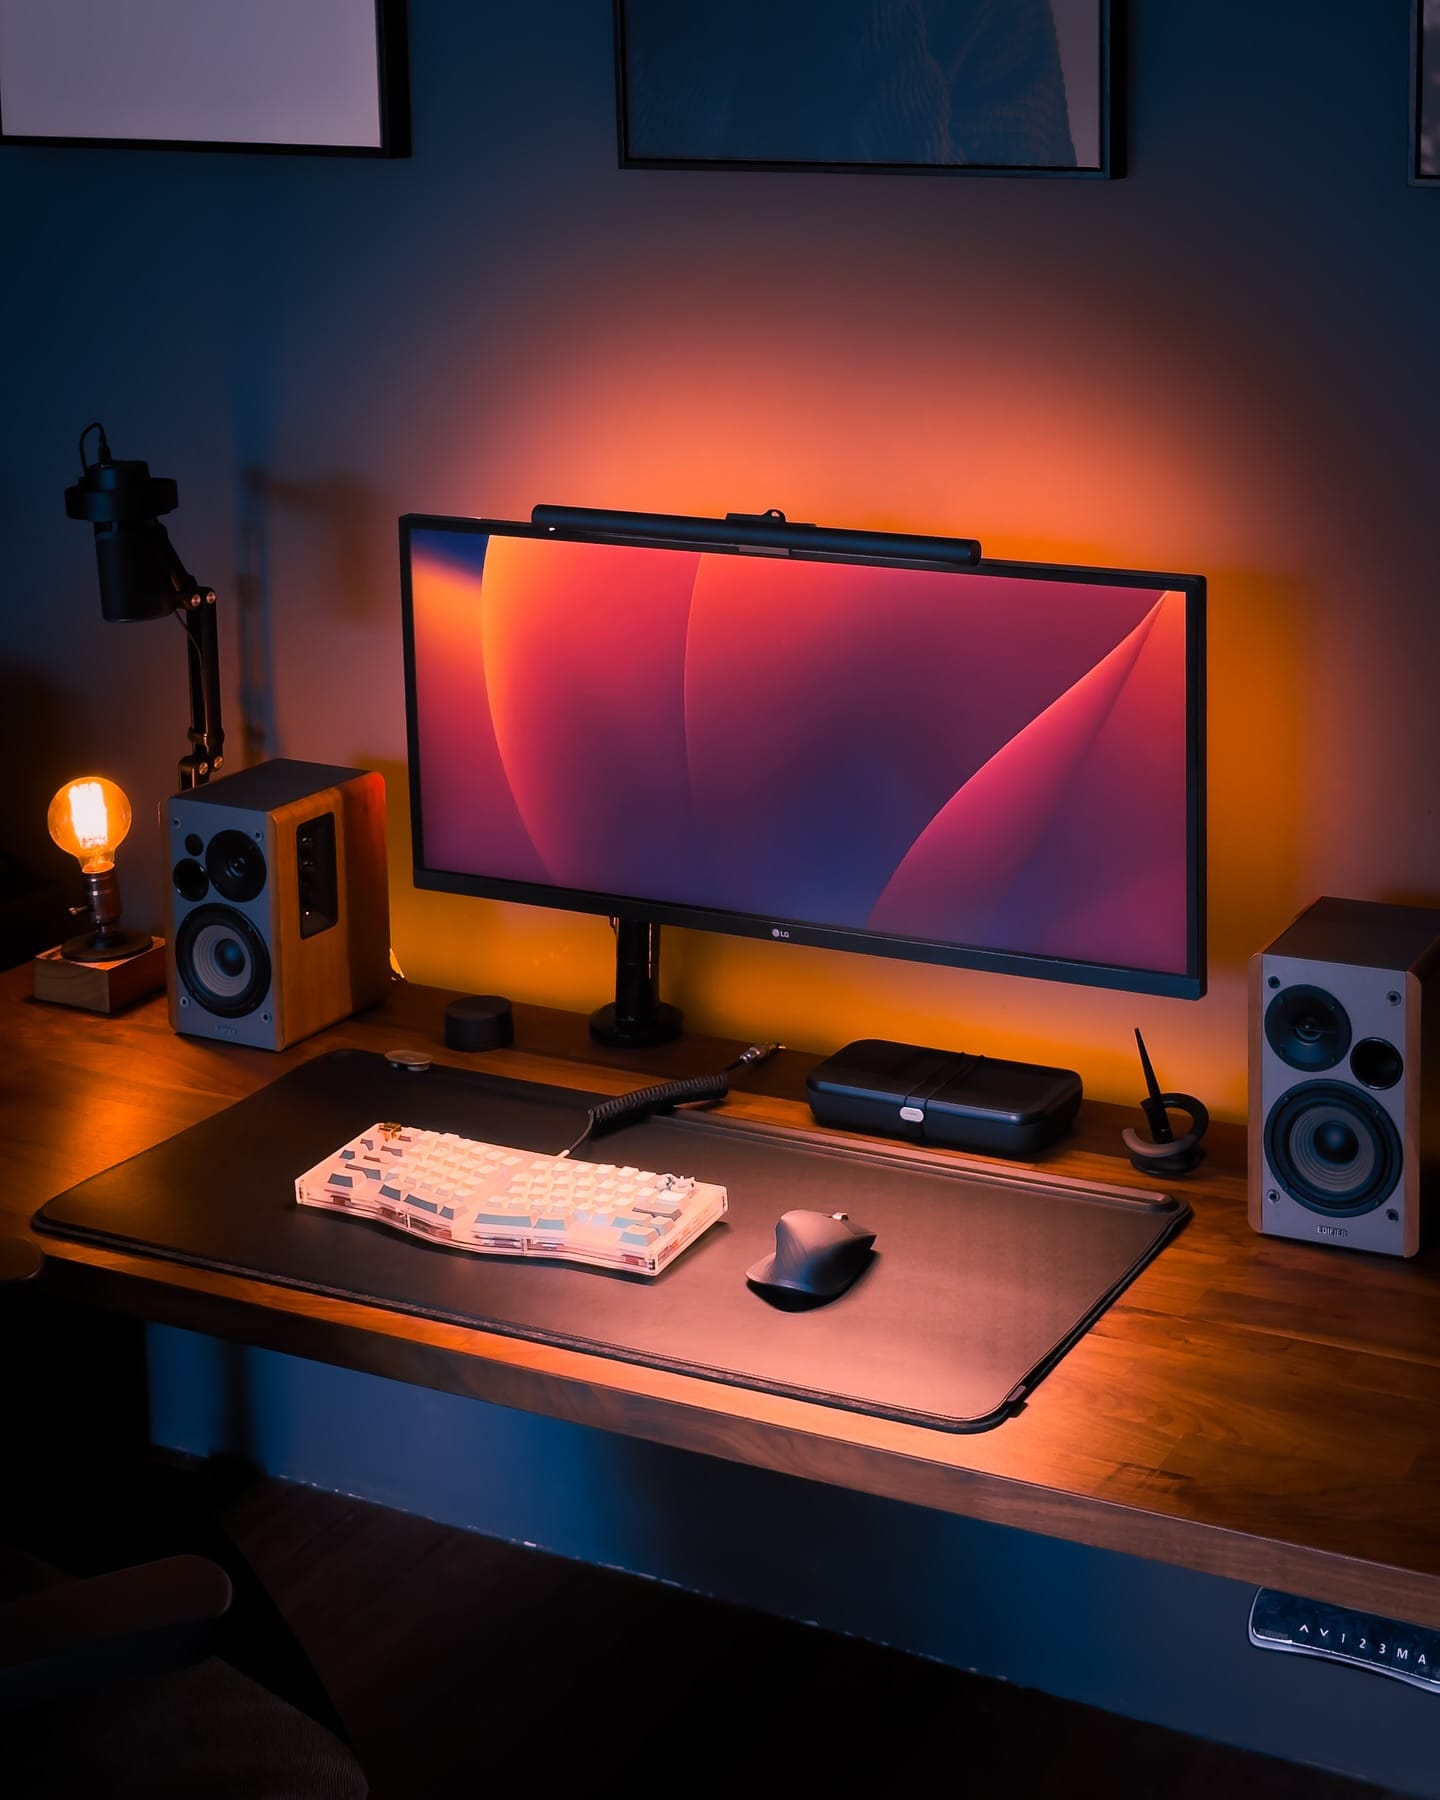 A modern workspace setup featuring an LG 34WK650 monitor, Switch Couture Frosted Acrylic Alice keyboard, and Logitech MX Master 3 mouse, illuminated by warm ambient lighting